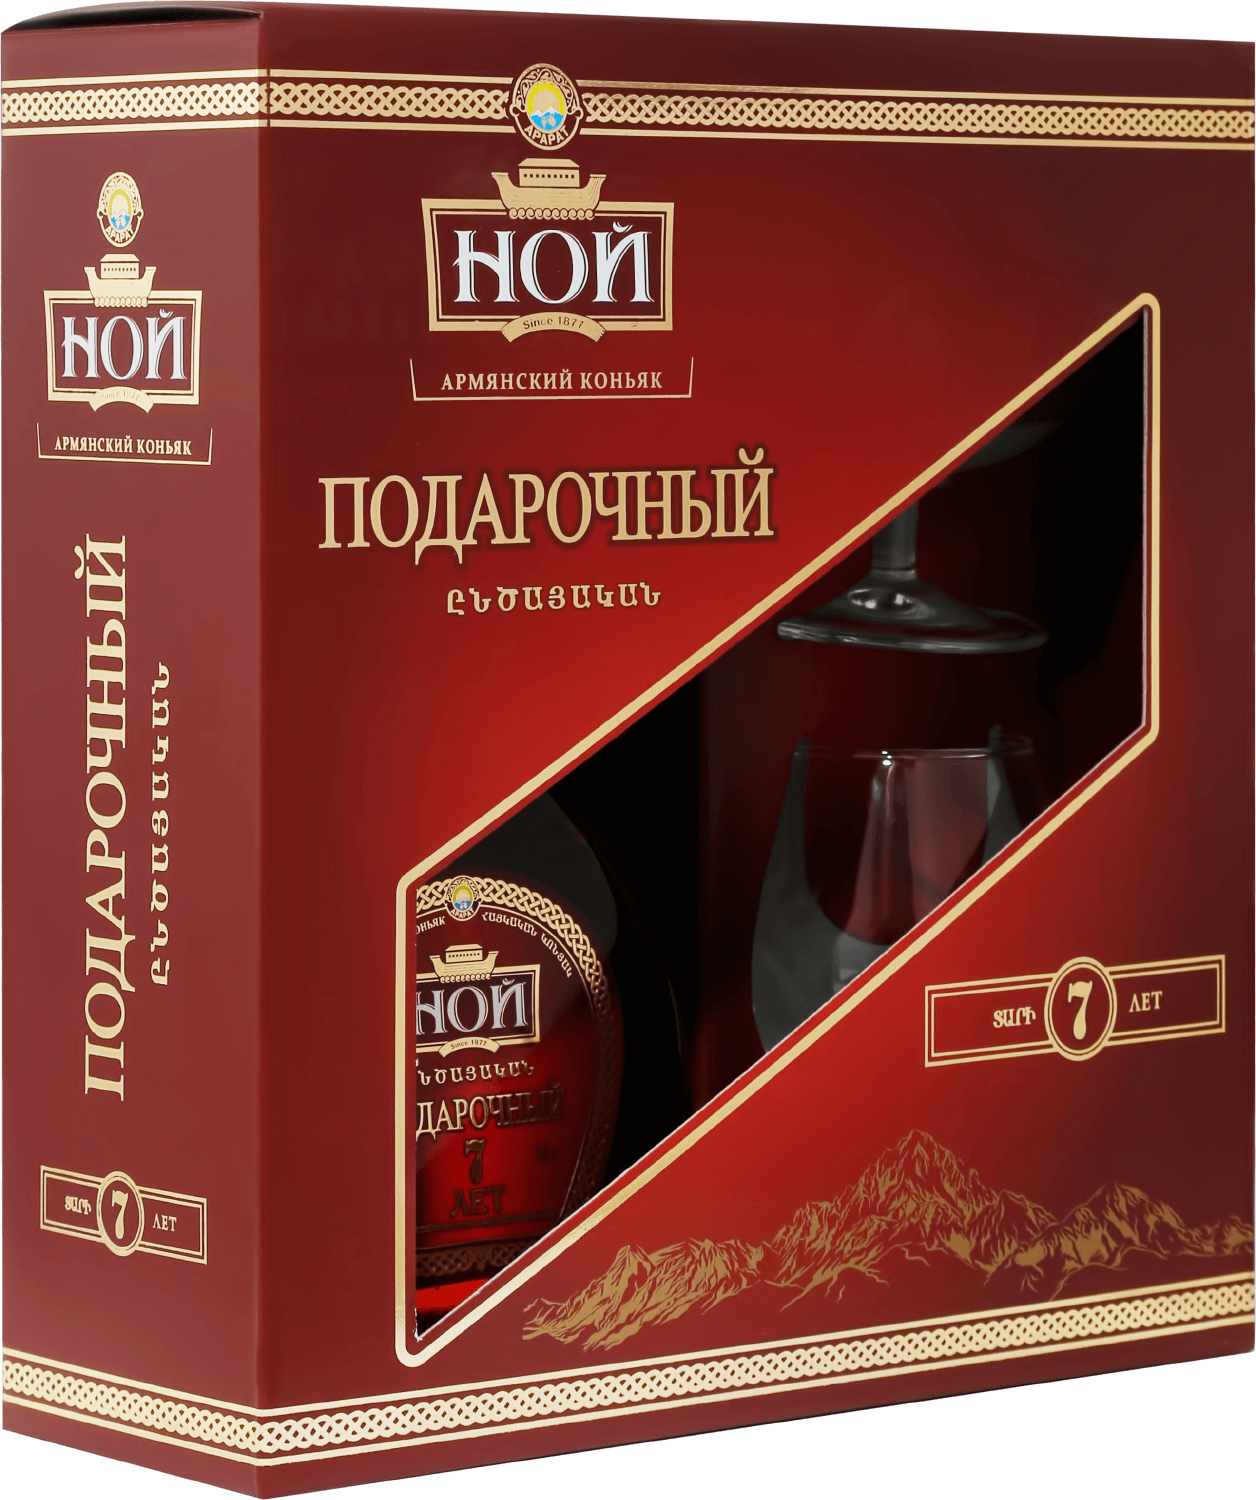 metaxa 7 stars gift box with two glasses Noy Podarochniy Armenian Brandy 7 y.o. in gift box with two glasses